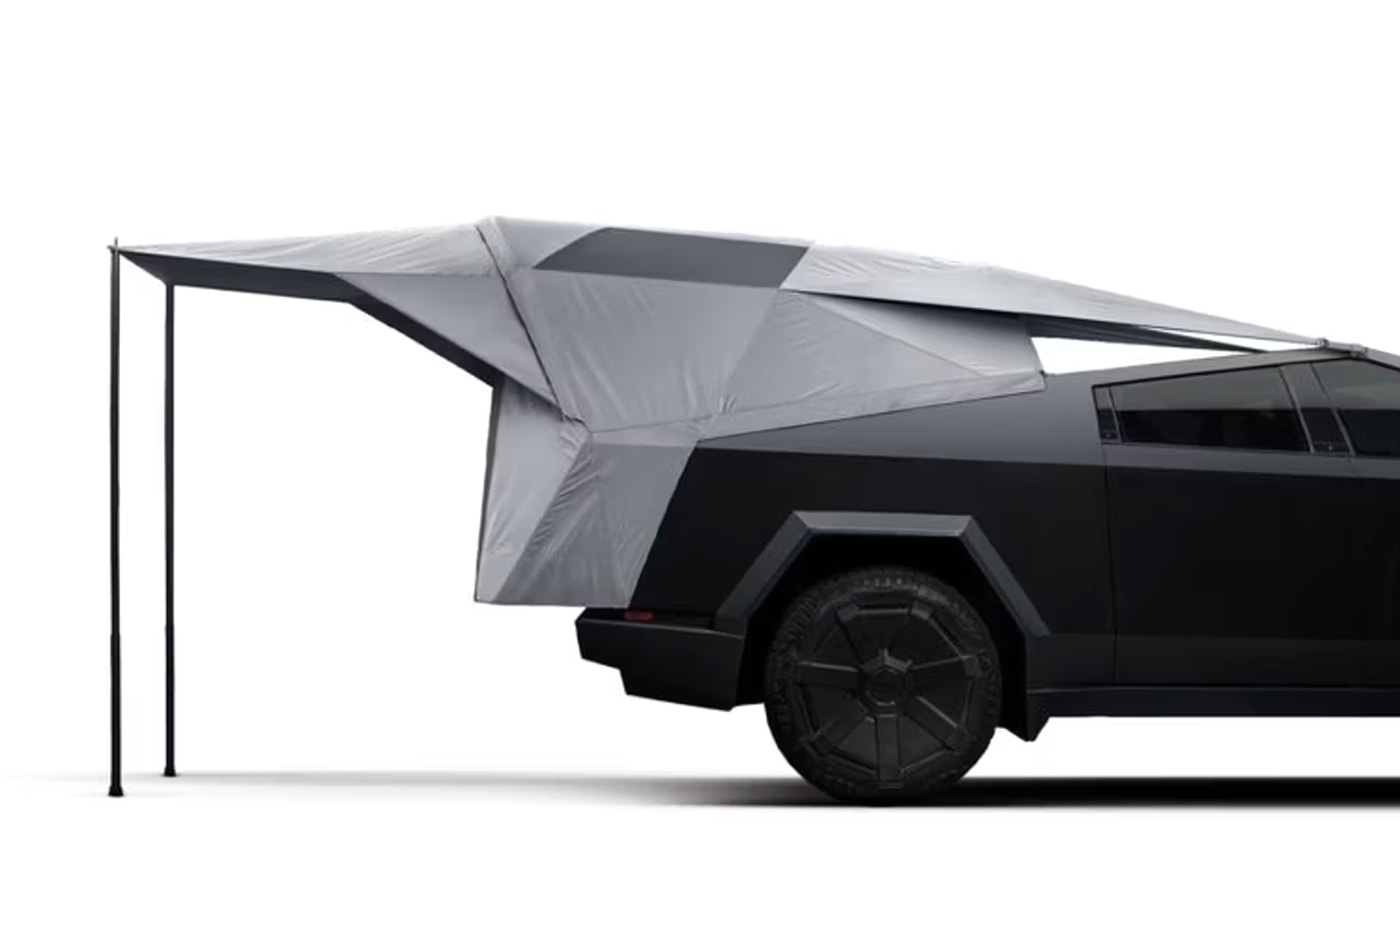 Heimplanet Tesla's Tent basecamp Cybertruck Portable Campsite product release launch electric truck details price